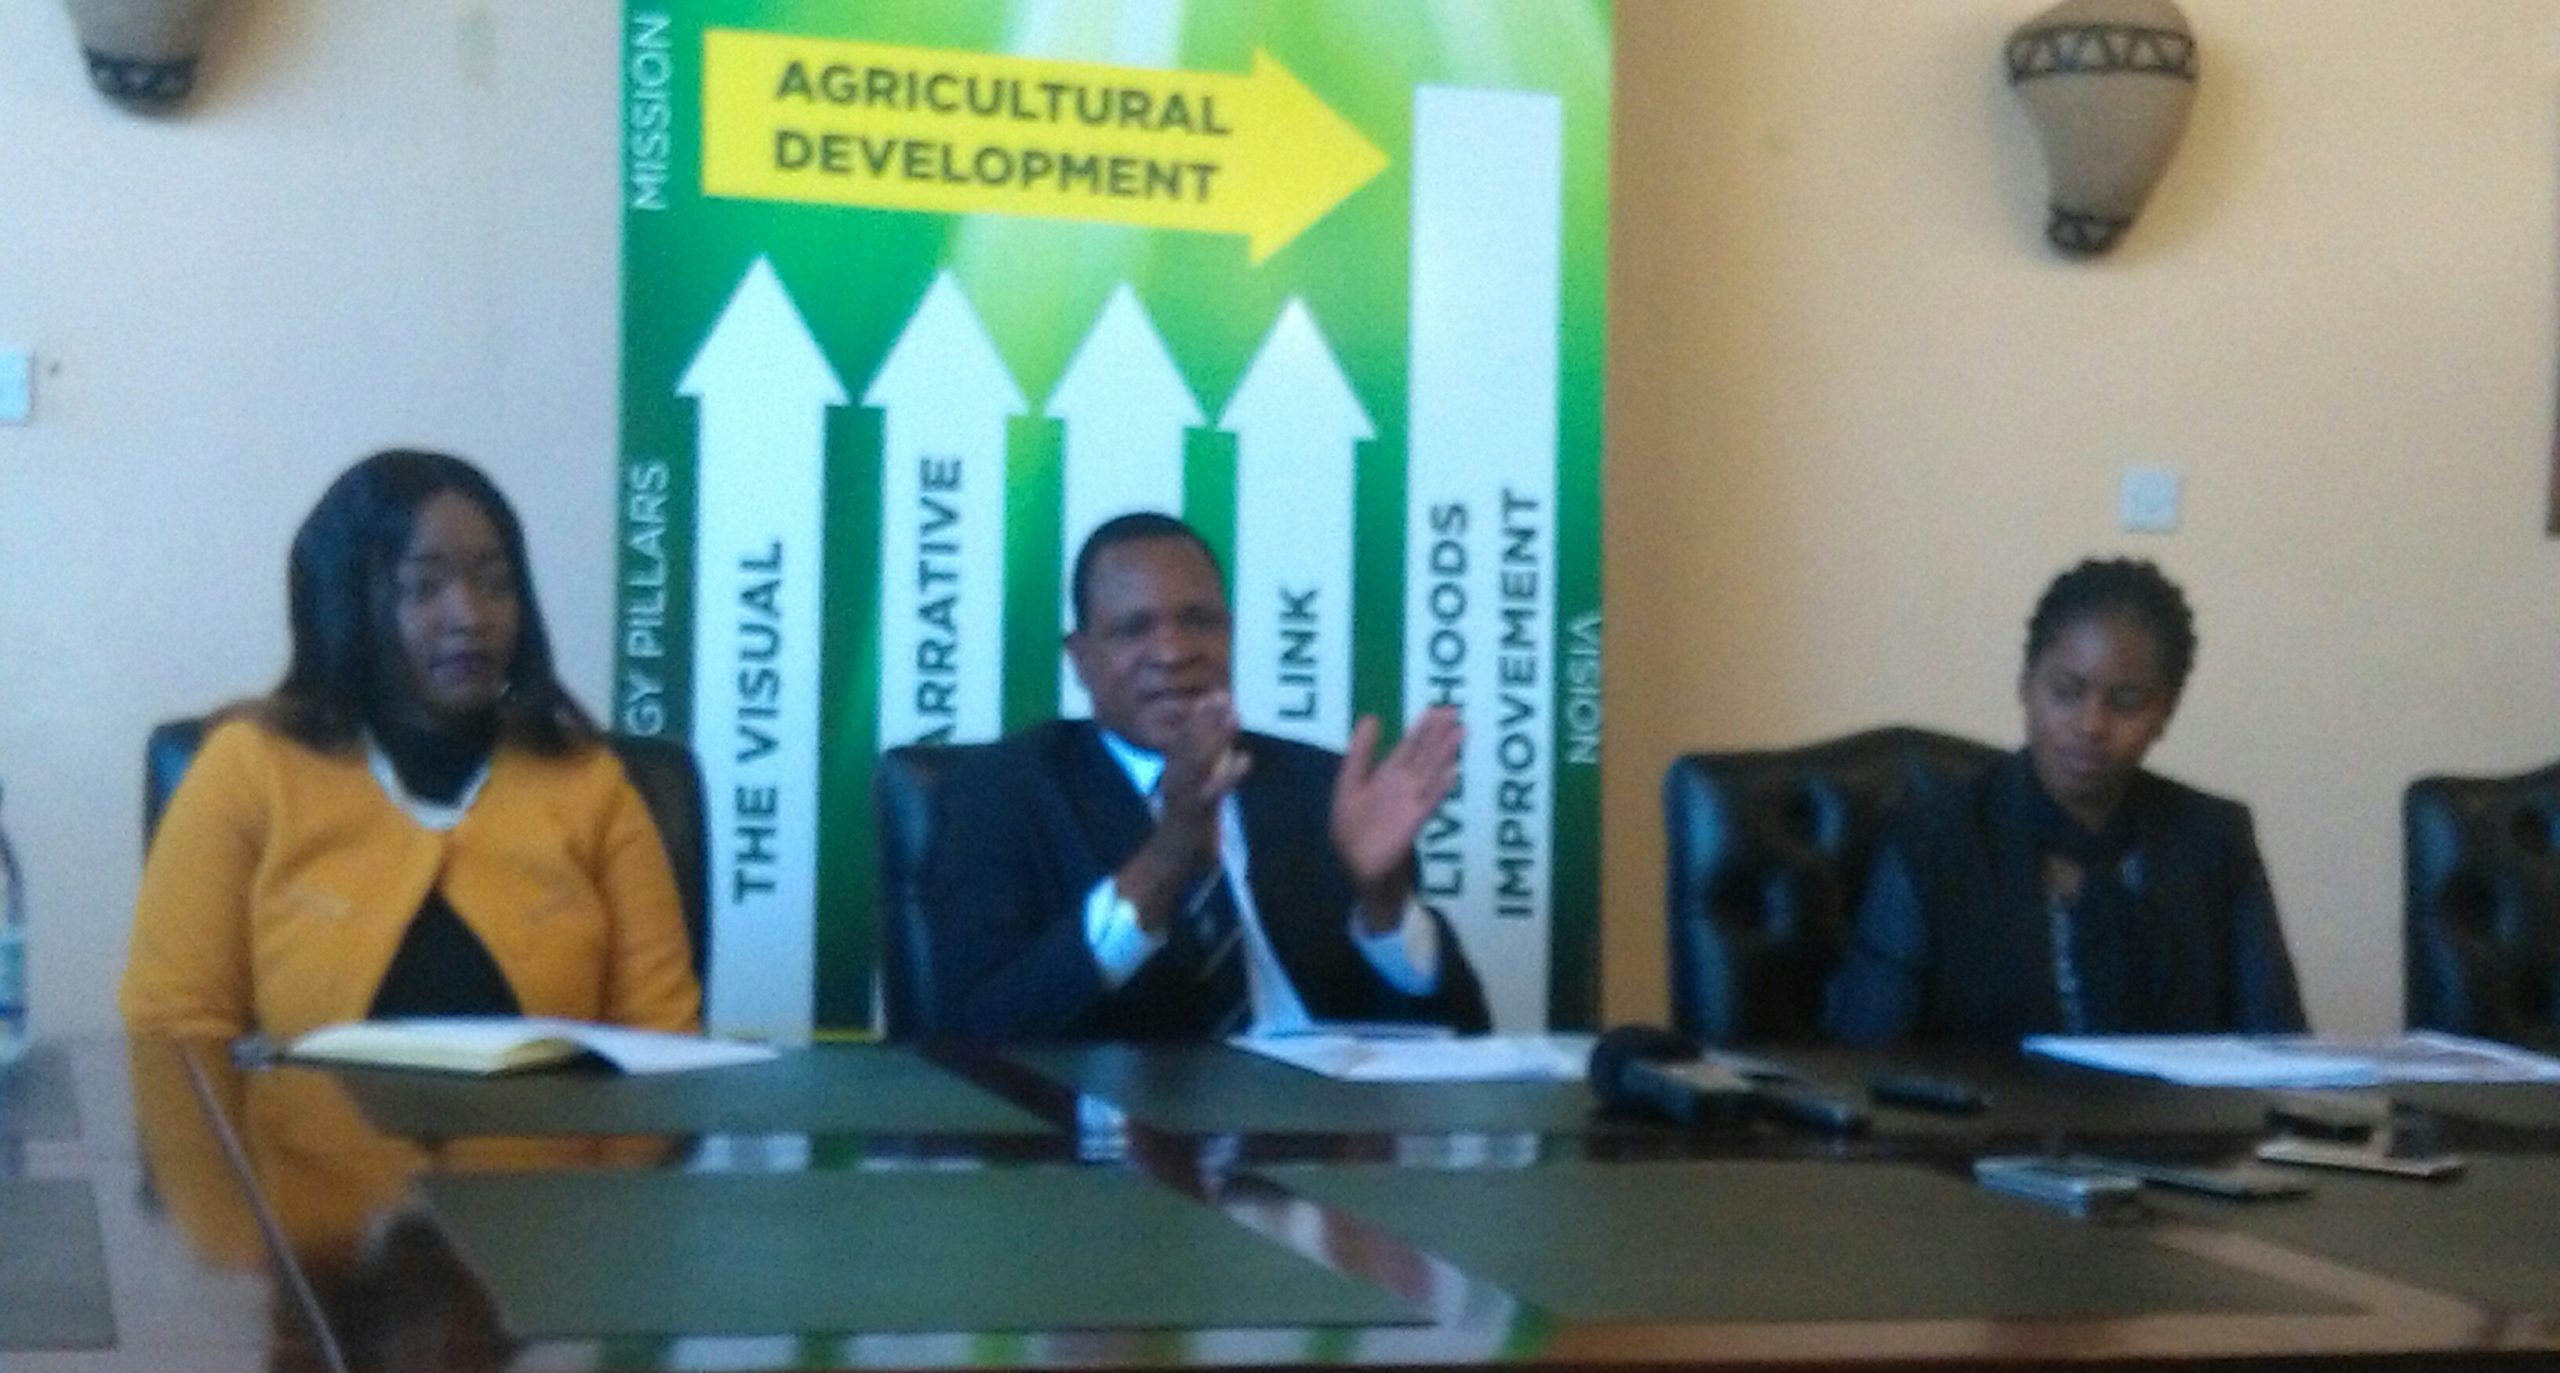 OPC at 2017 Harare Agricultural Show to enhance food security